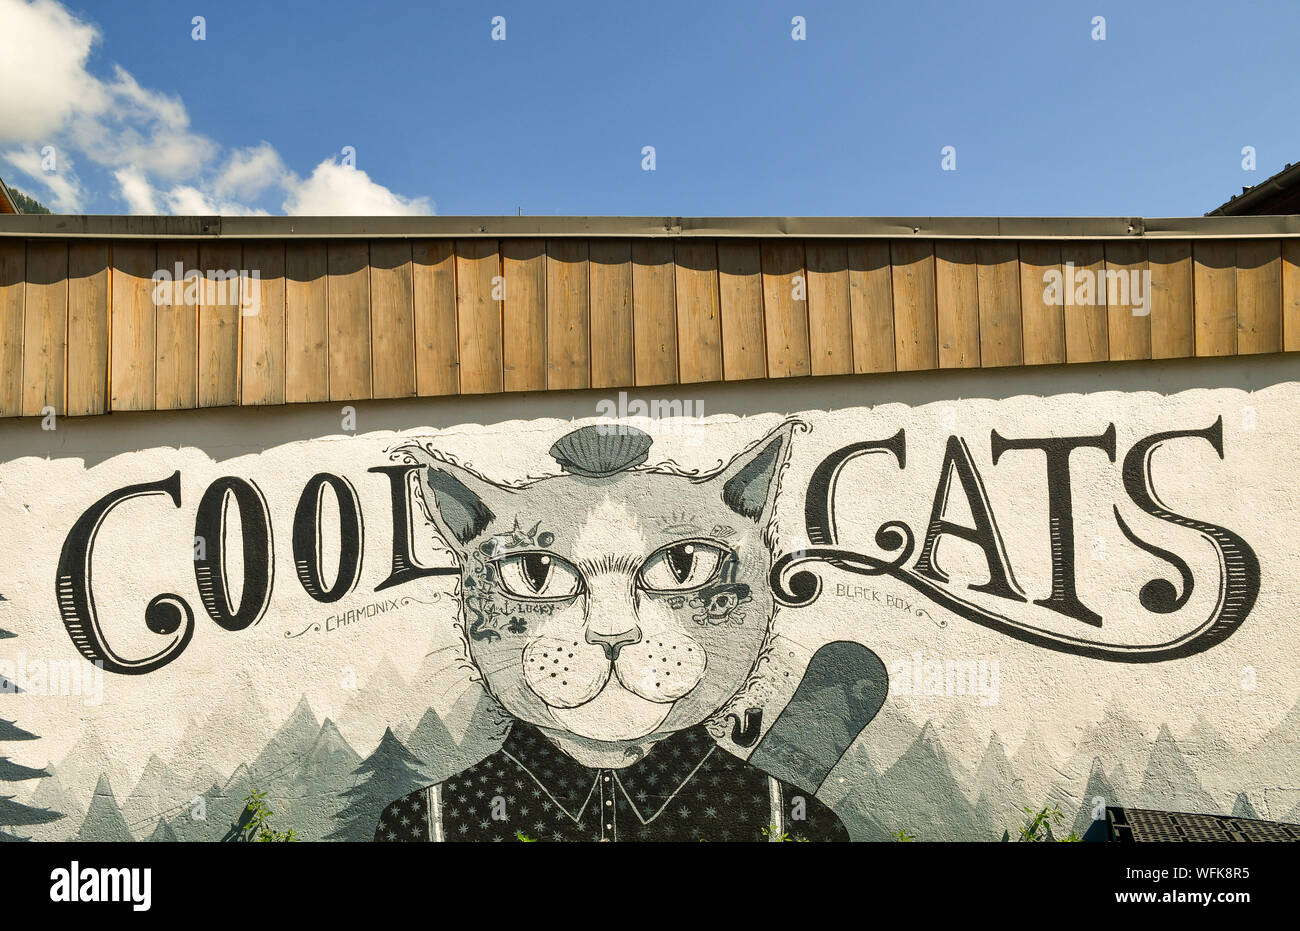 Close-up of a wall painting depicting a smartly dressed cat in comic style with the words 'Cool Cats', Chamonix-Mont-Blanc, Haute Savoie, France Stock Photo